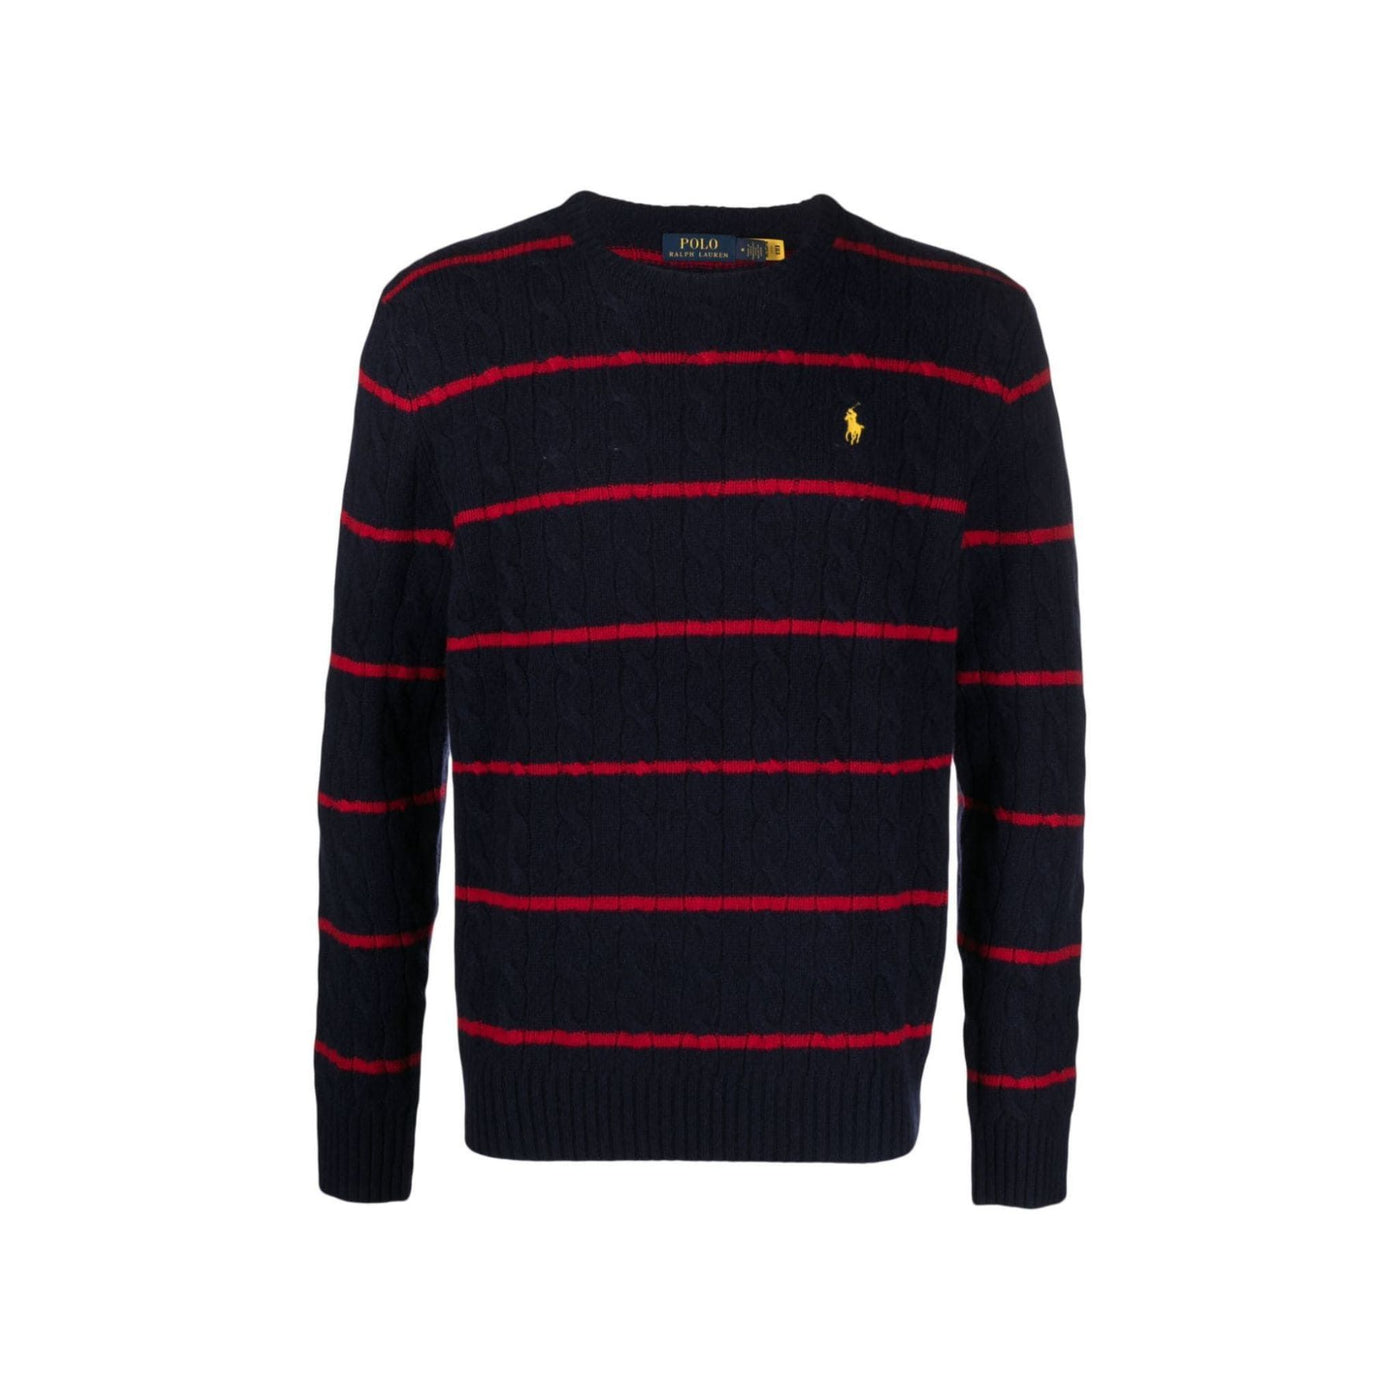 Men's cable-knit wool sweater